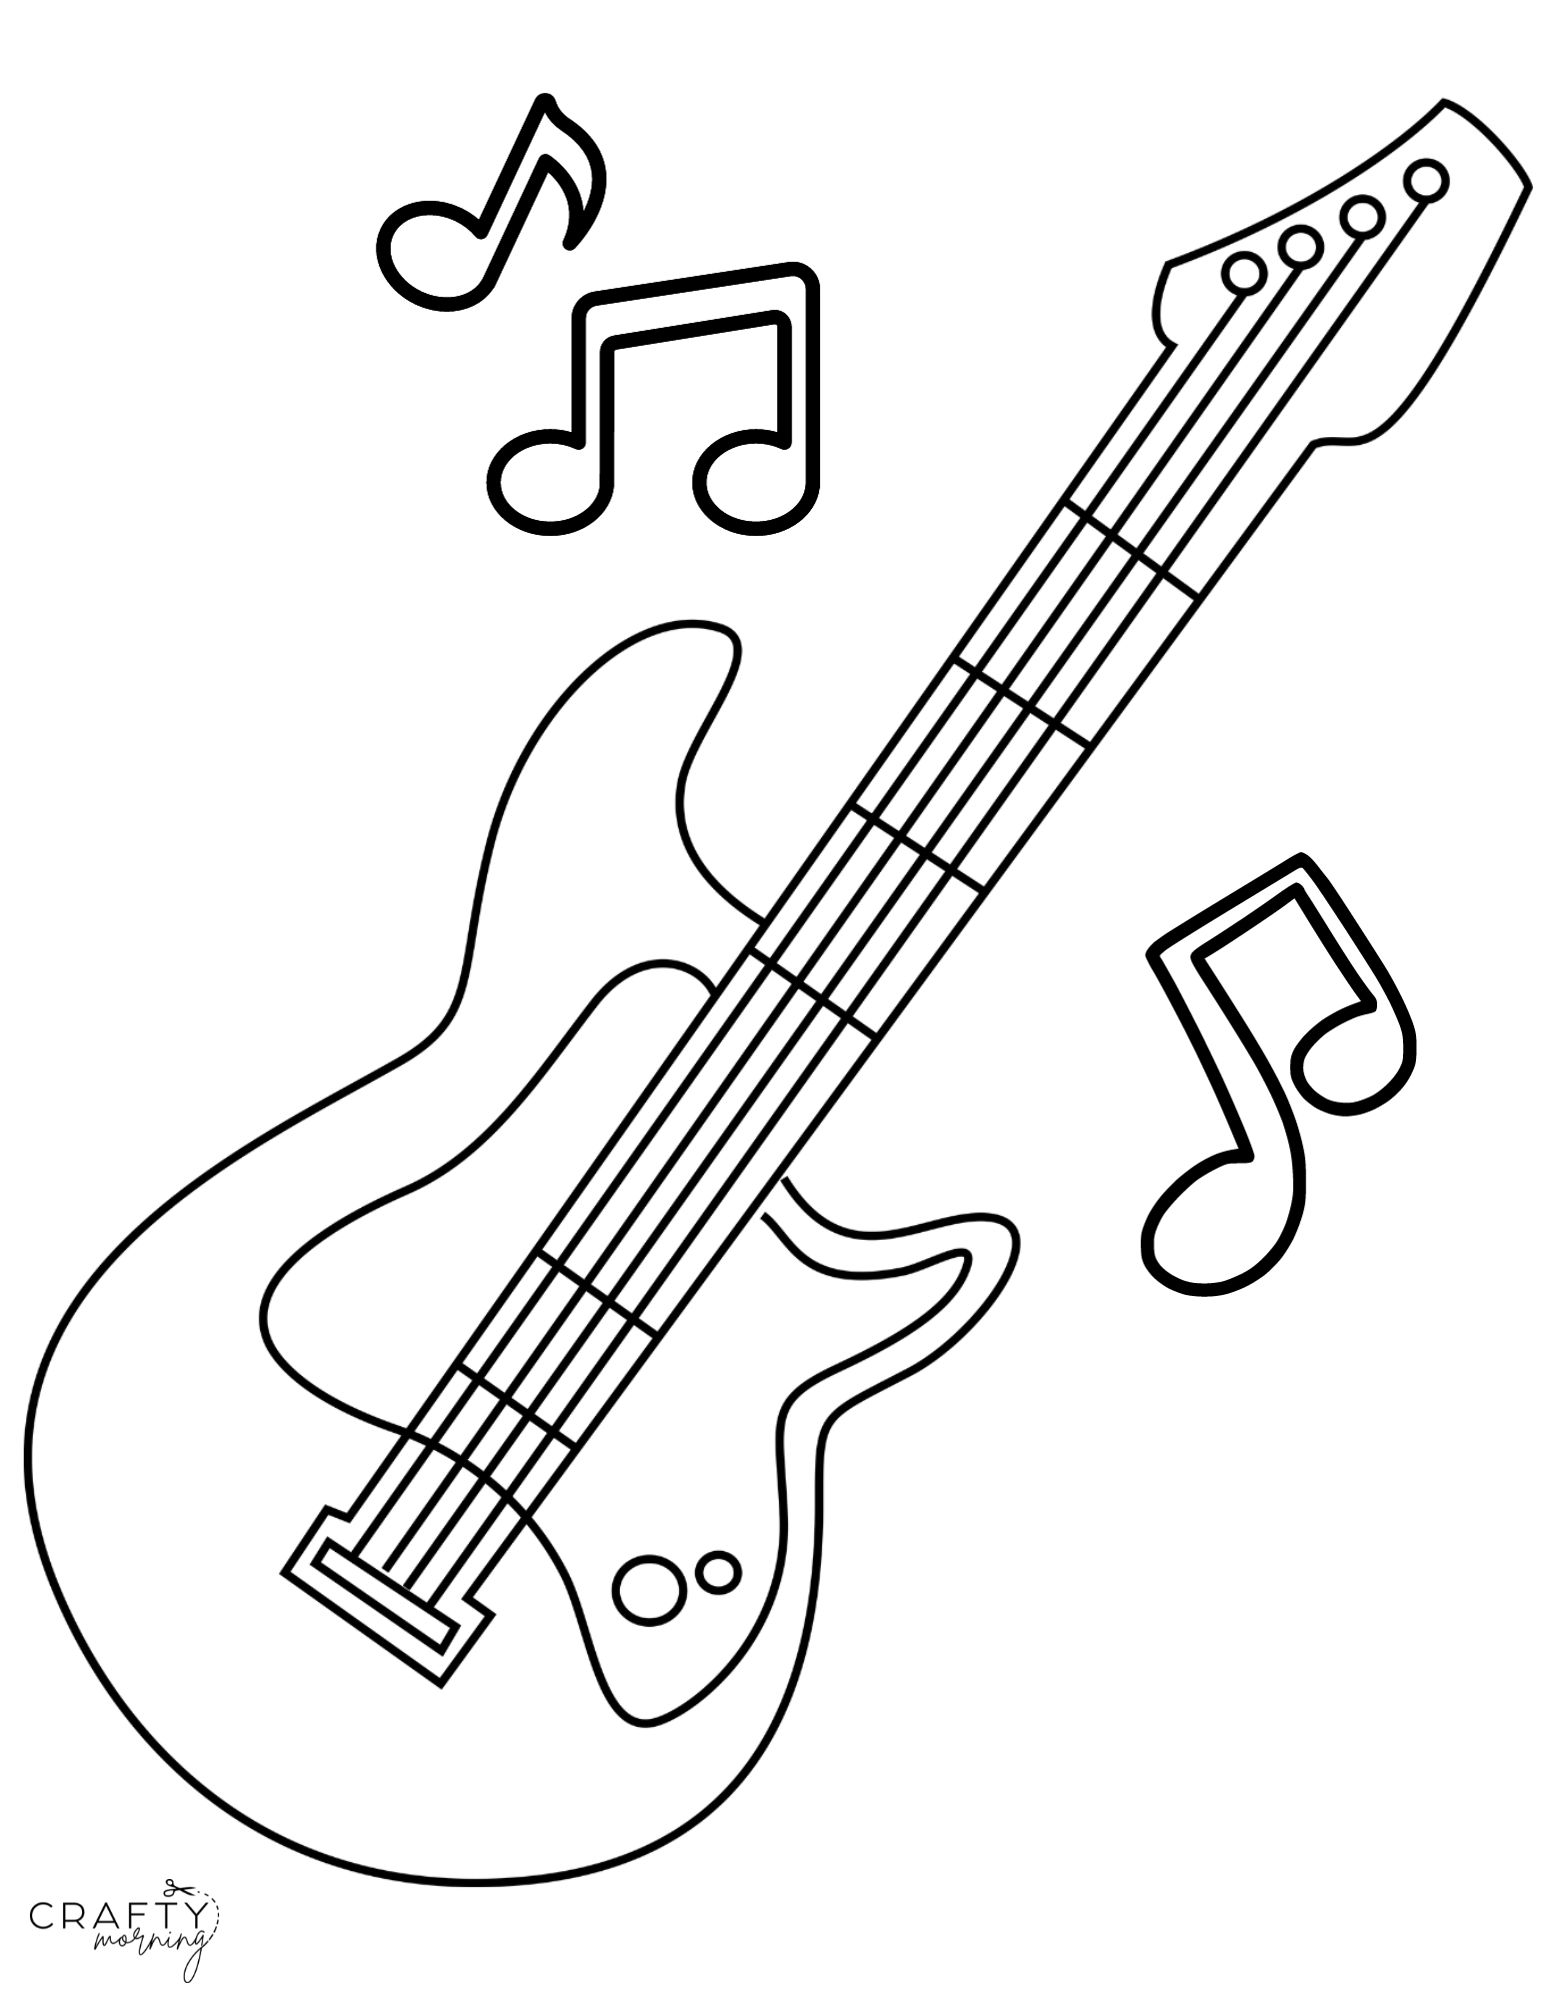 An Outline Drawing Of An Acoustic Guitar Sketch Vector, Guitar Drawing,  Wing Drawing, Acoustic Guitar Drawing PNG and Vector with Transparent  Background for Free Download